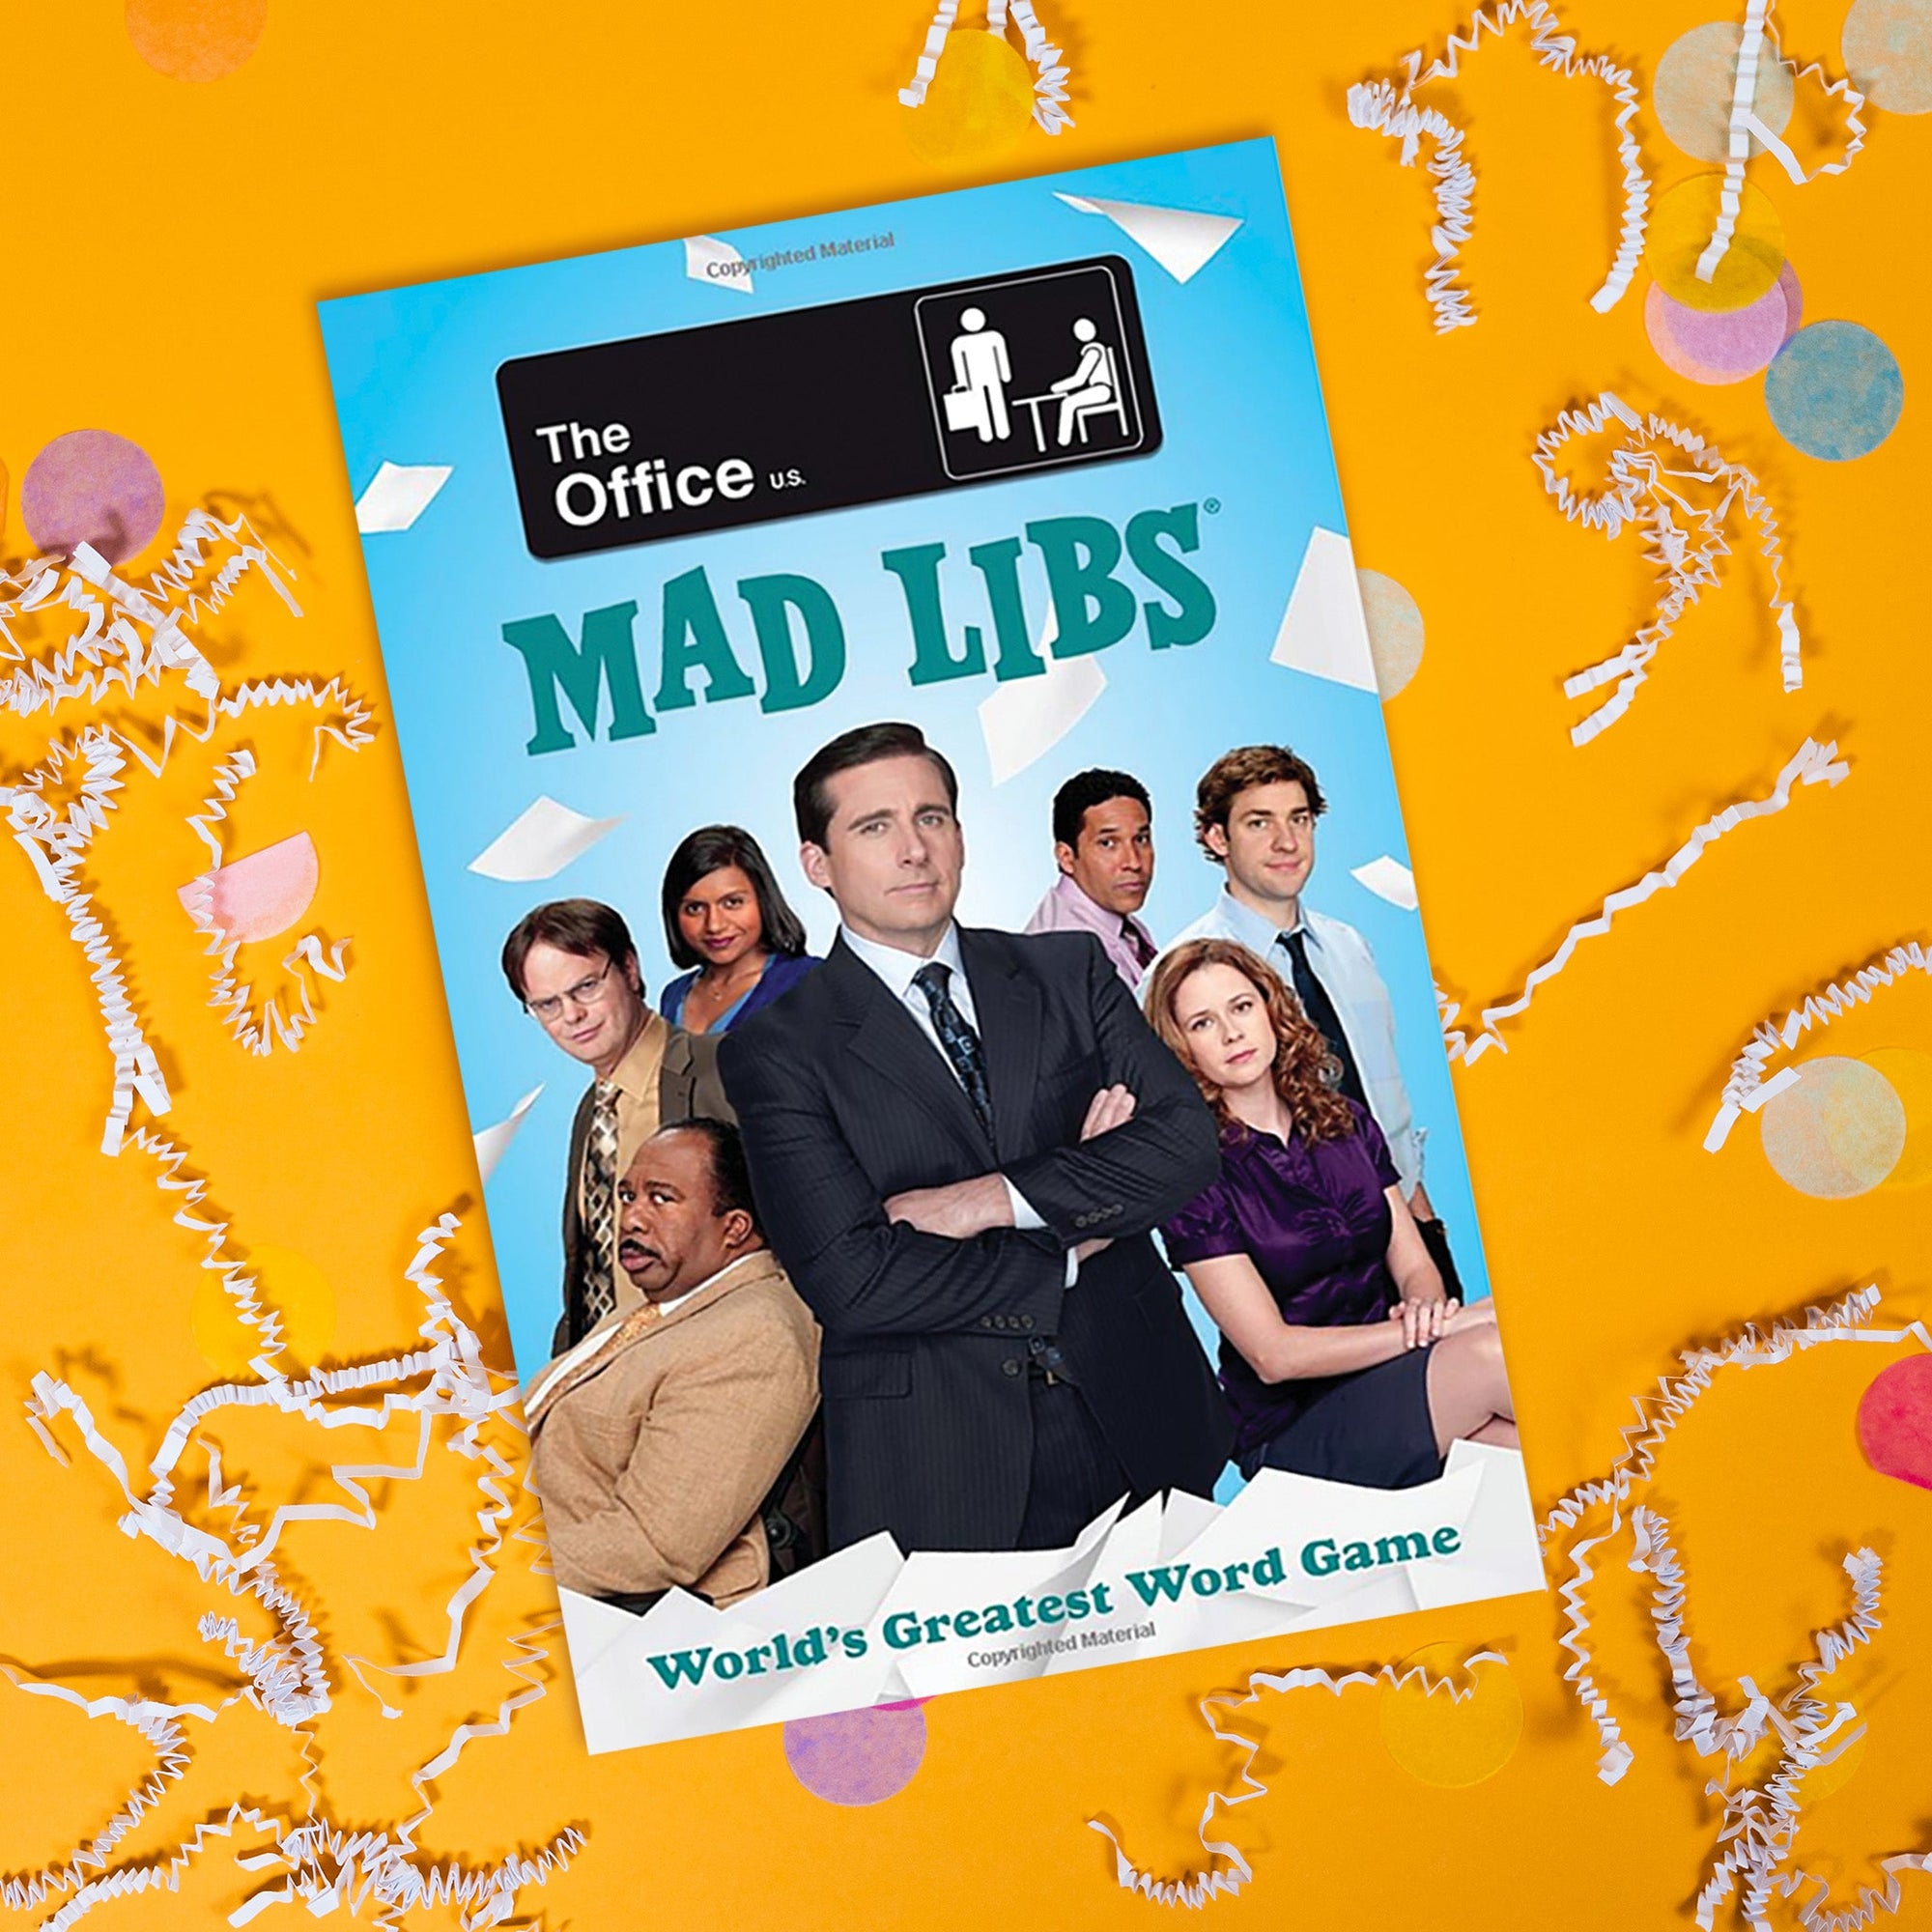 On a summery mustard background sits a book with white crinkle and big, colorful confeetti scattered around. This The Office inspired game book has a picture of various characters from The Office and says "The Office," "MAD LIBS" and "World's Greatest Word Game" in a teal font.